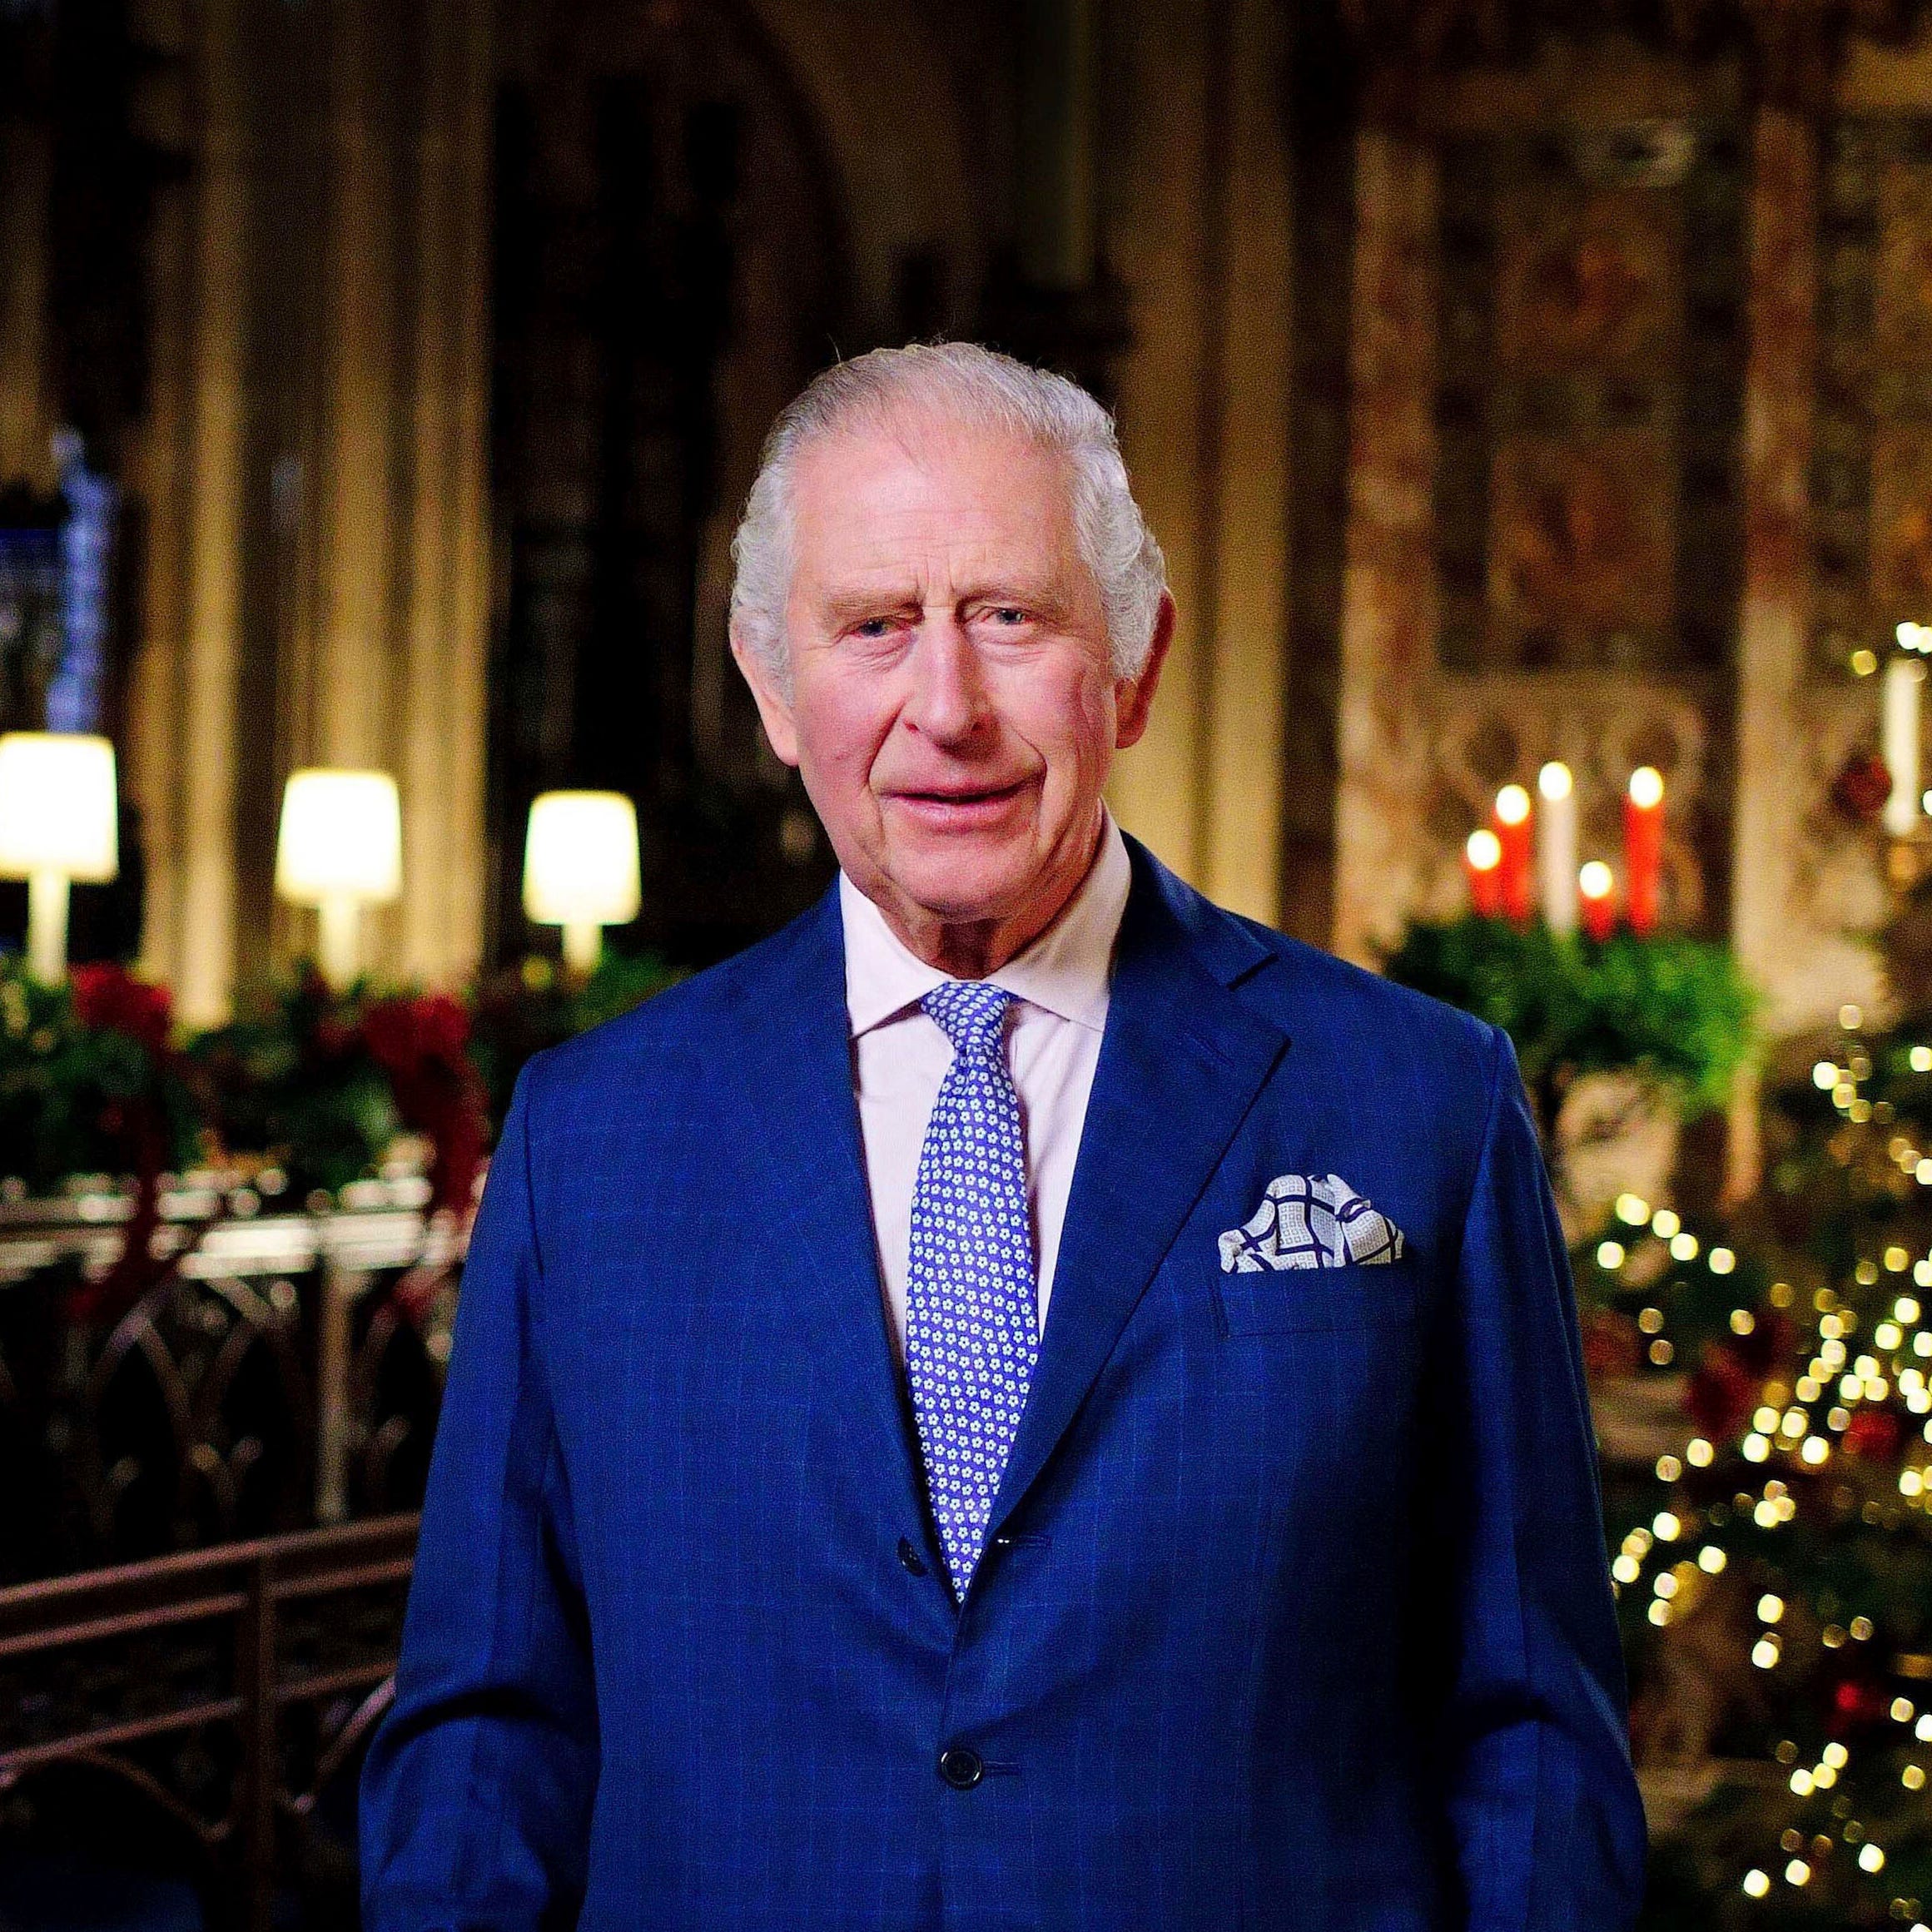 Britain's King Charles III delivers his message during the recording of his first Christmas broadcast in the Quire of St George's Chapel at Windsor Castle, Berkshire, England, Tuesday, Dec. 13, 2022. King Charles III evoked memories of his late mother, Queen Elizabeth II, as he broadcast his first Christmas message as monarch on Sunday, Dec. 25, 2022.